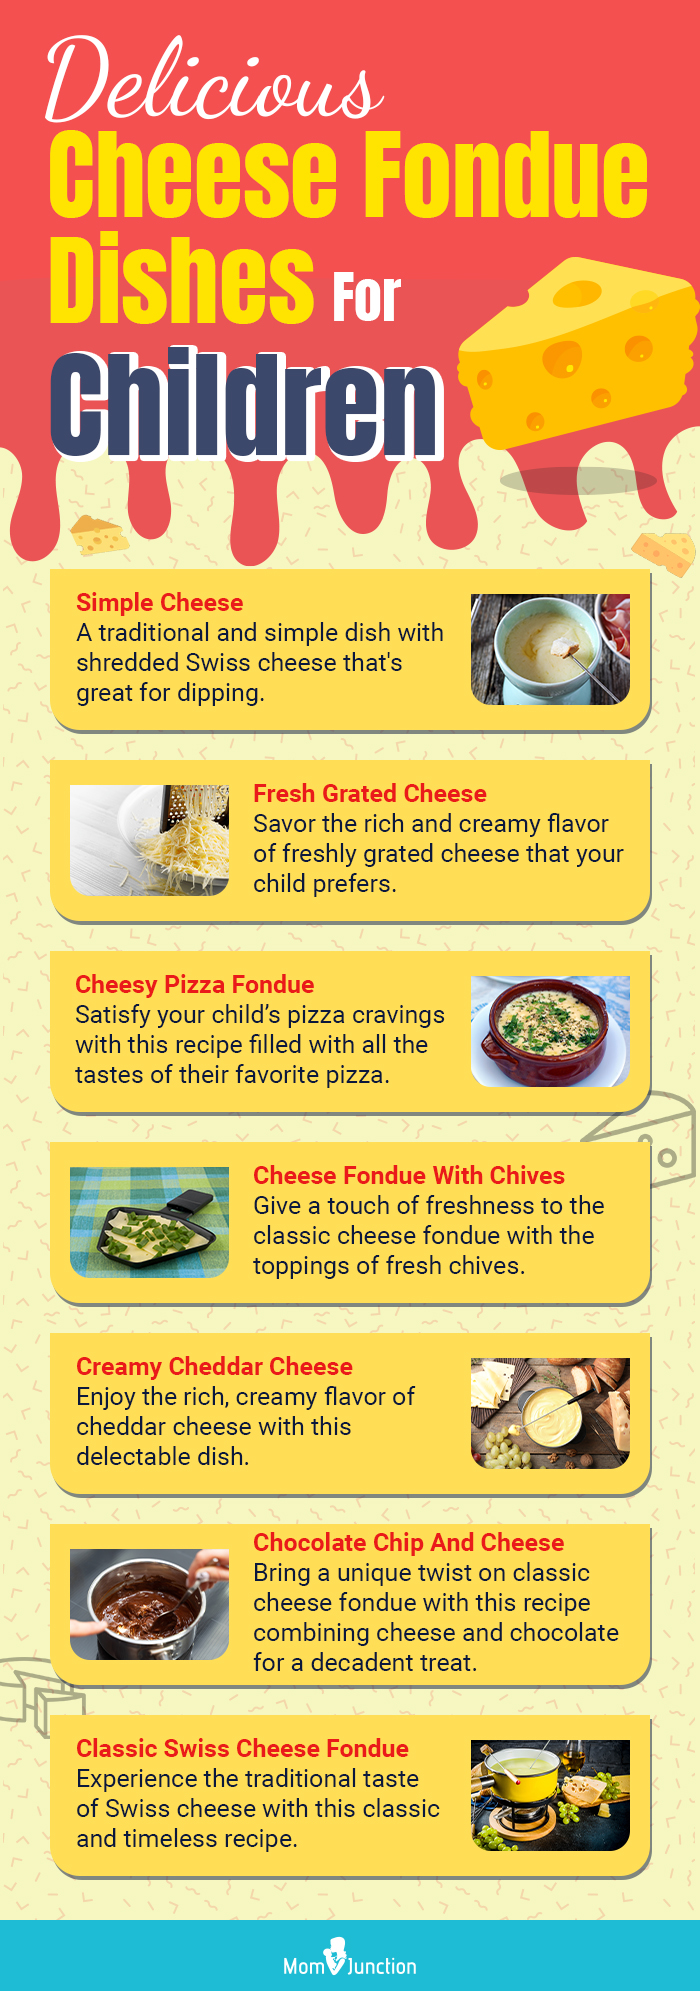 delicious cheese fondue dishes for children(infographic)